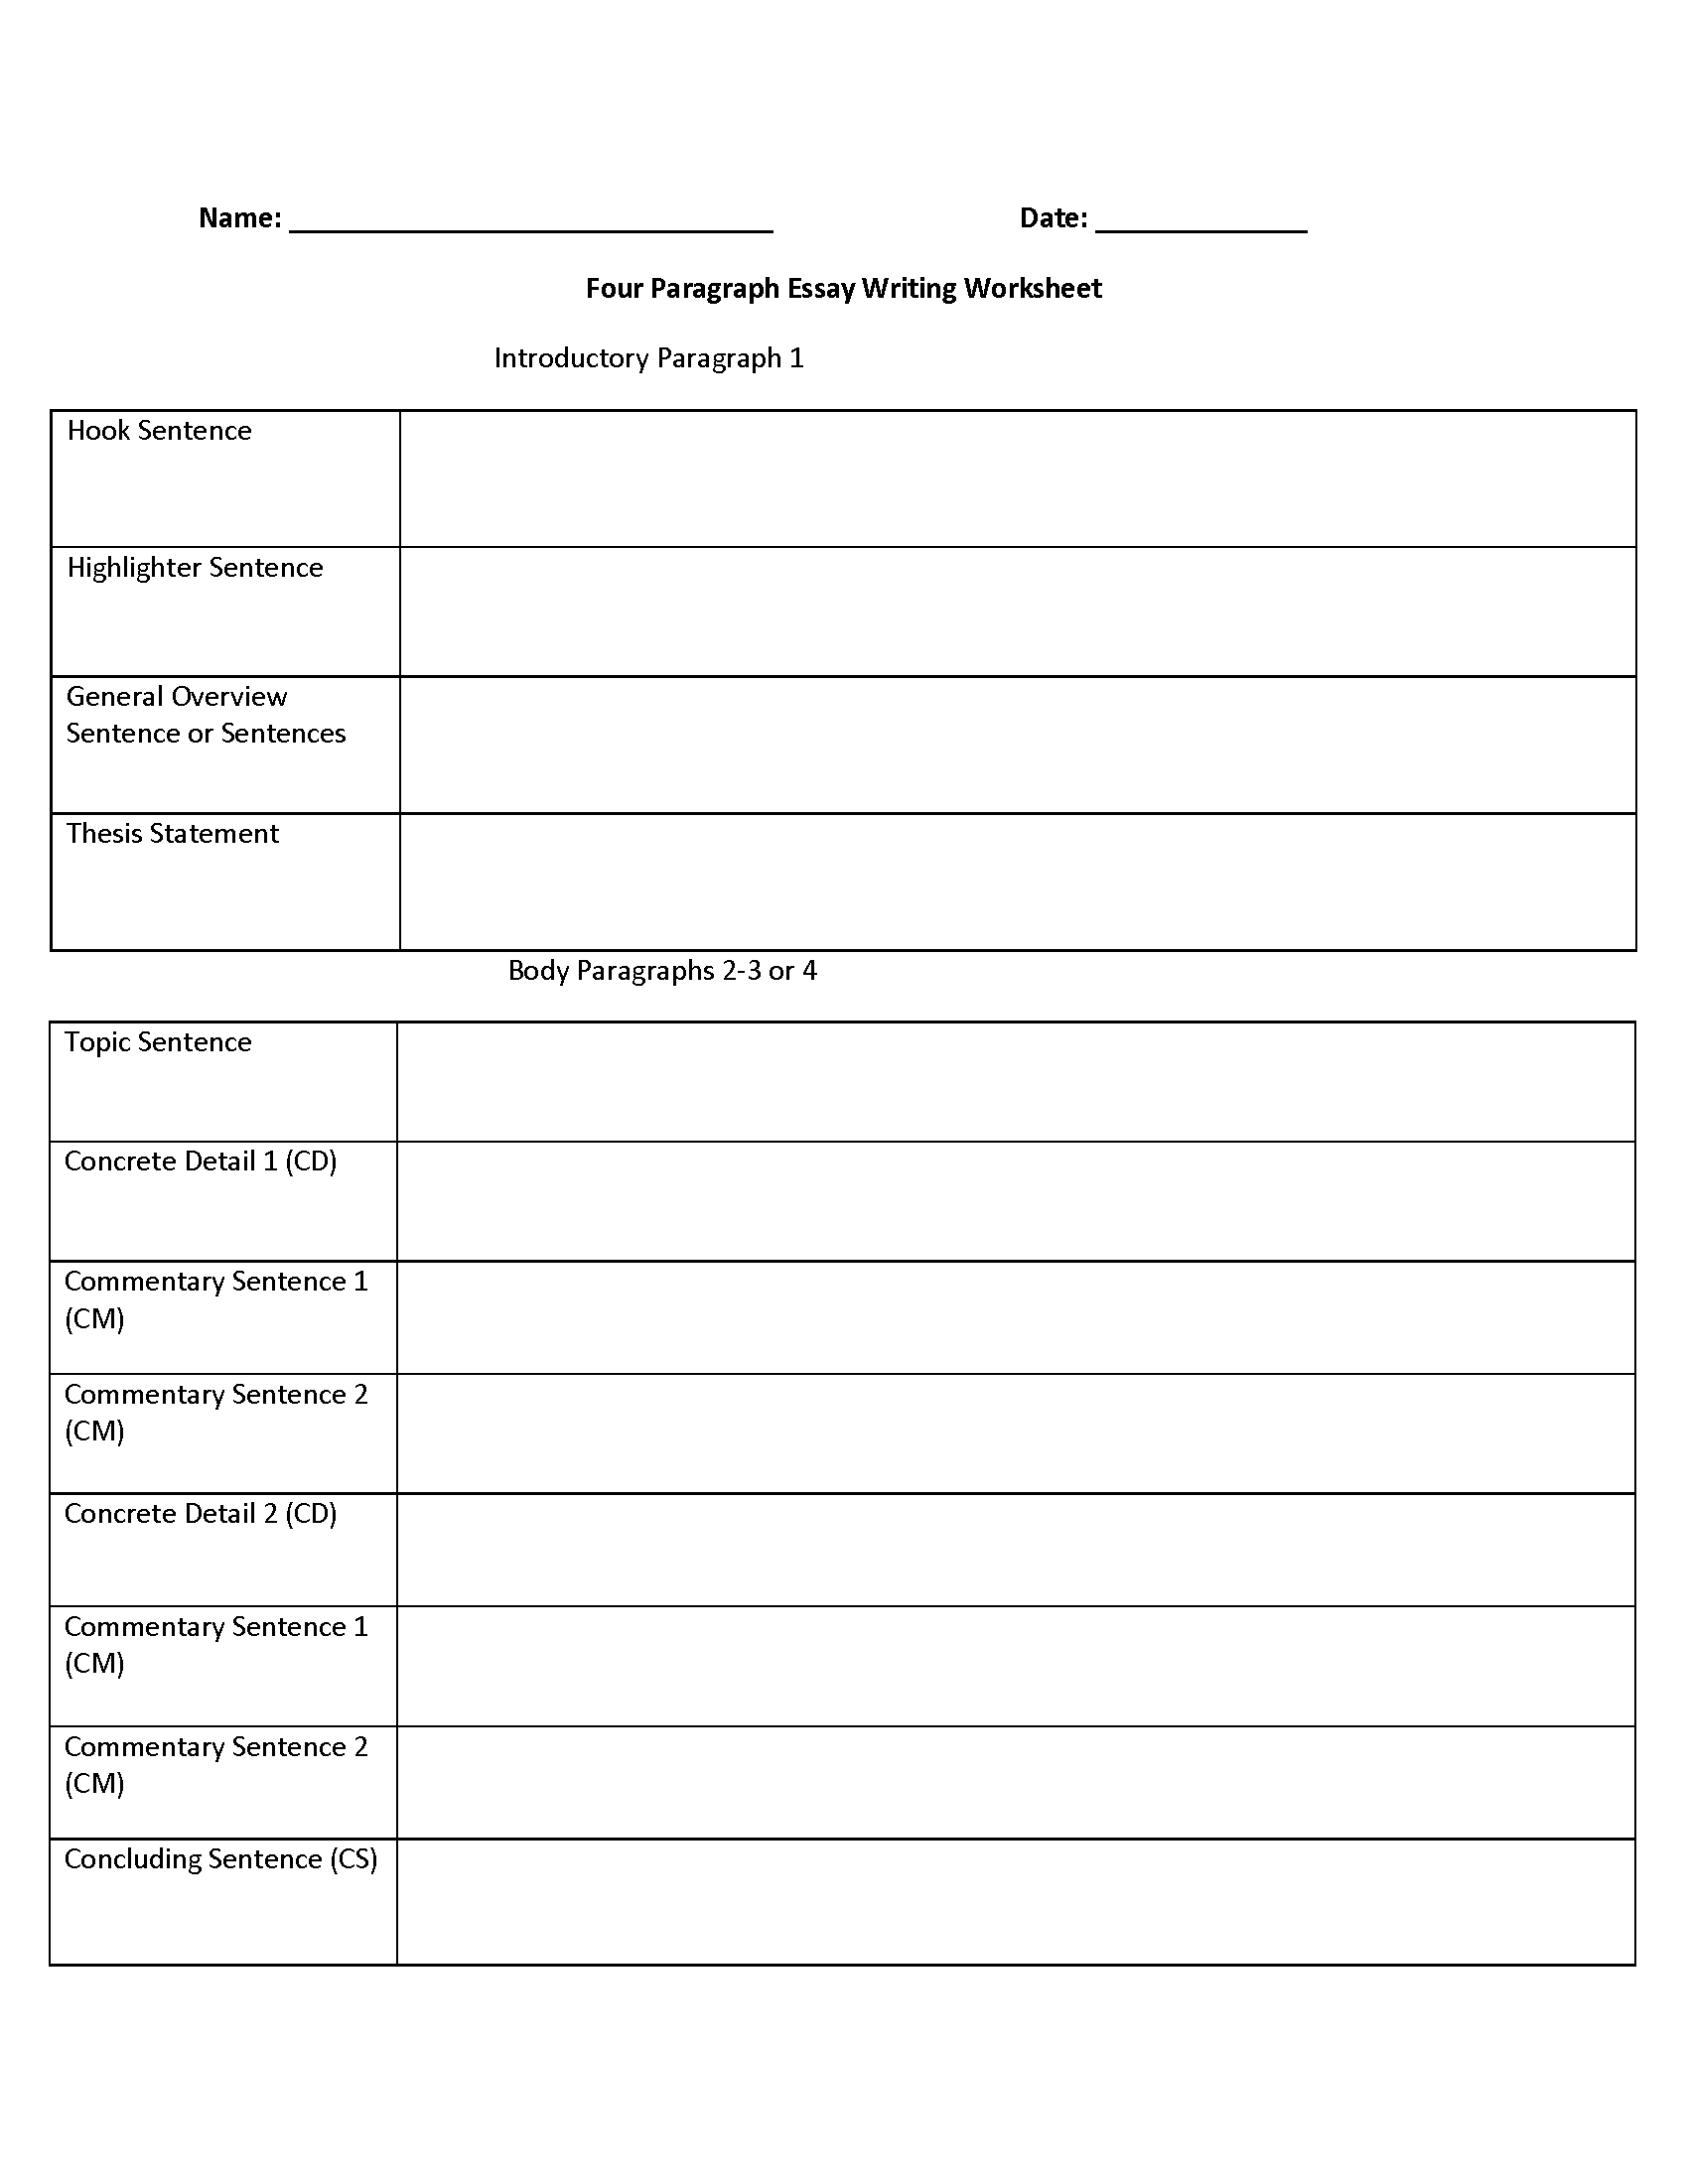 Four Paragraph Essay Graphic Organizers Worksheet